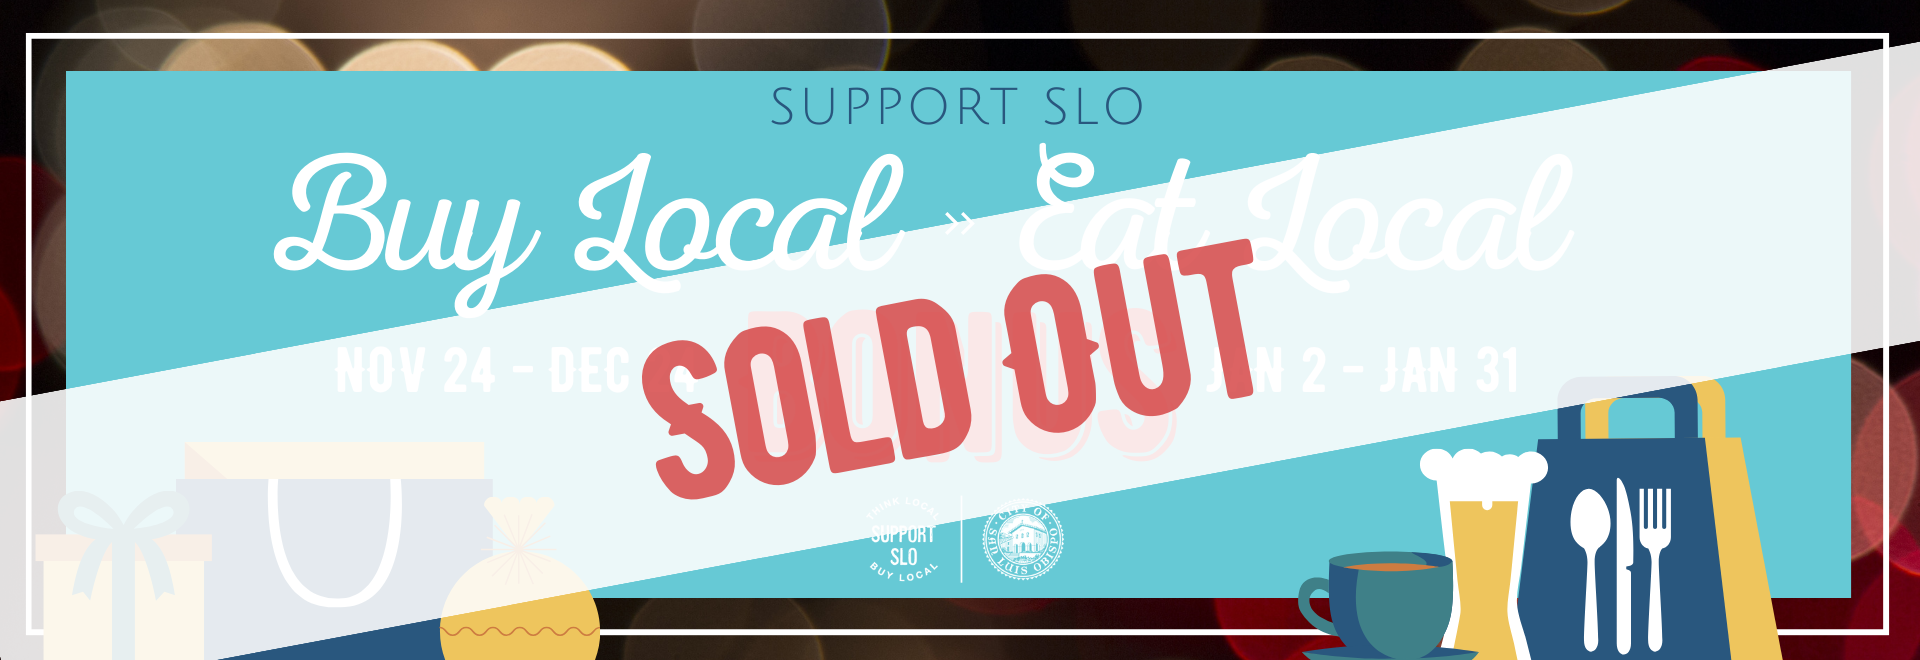 Buy Local Eat Local Sold Out